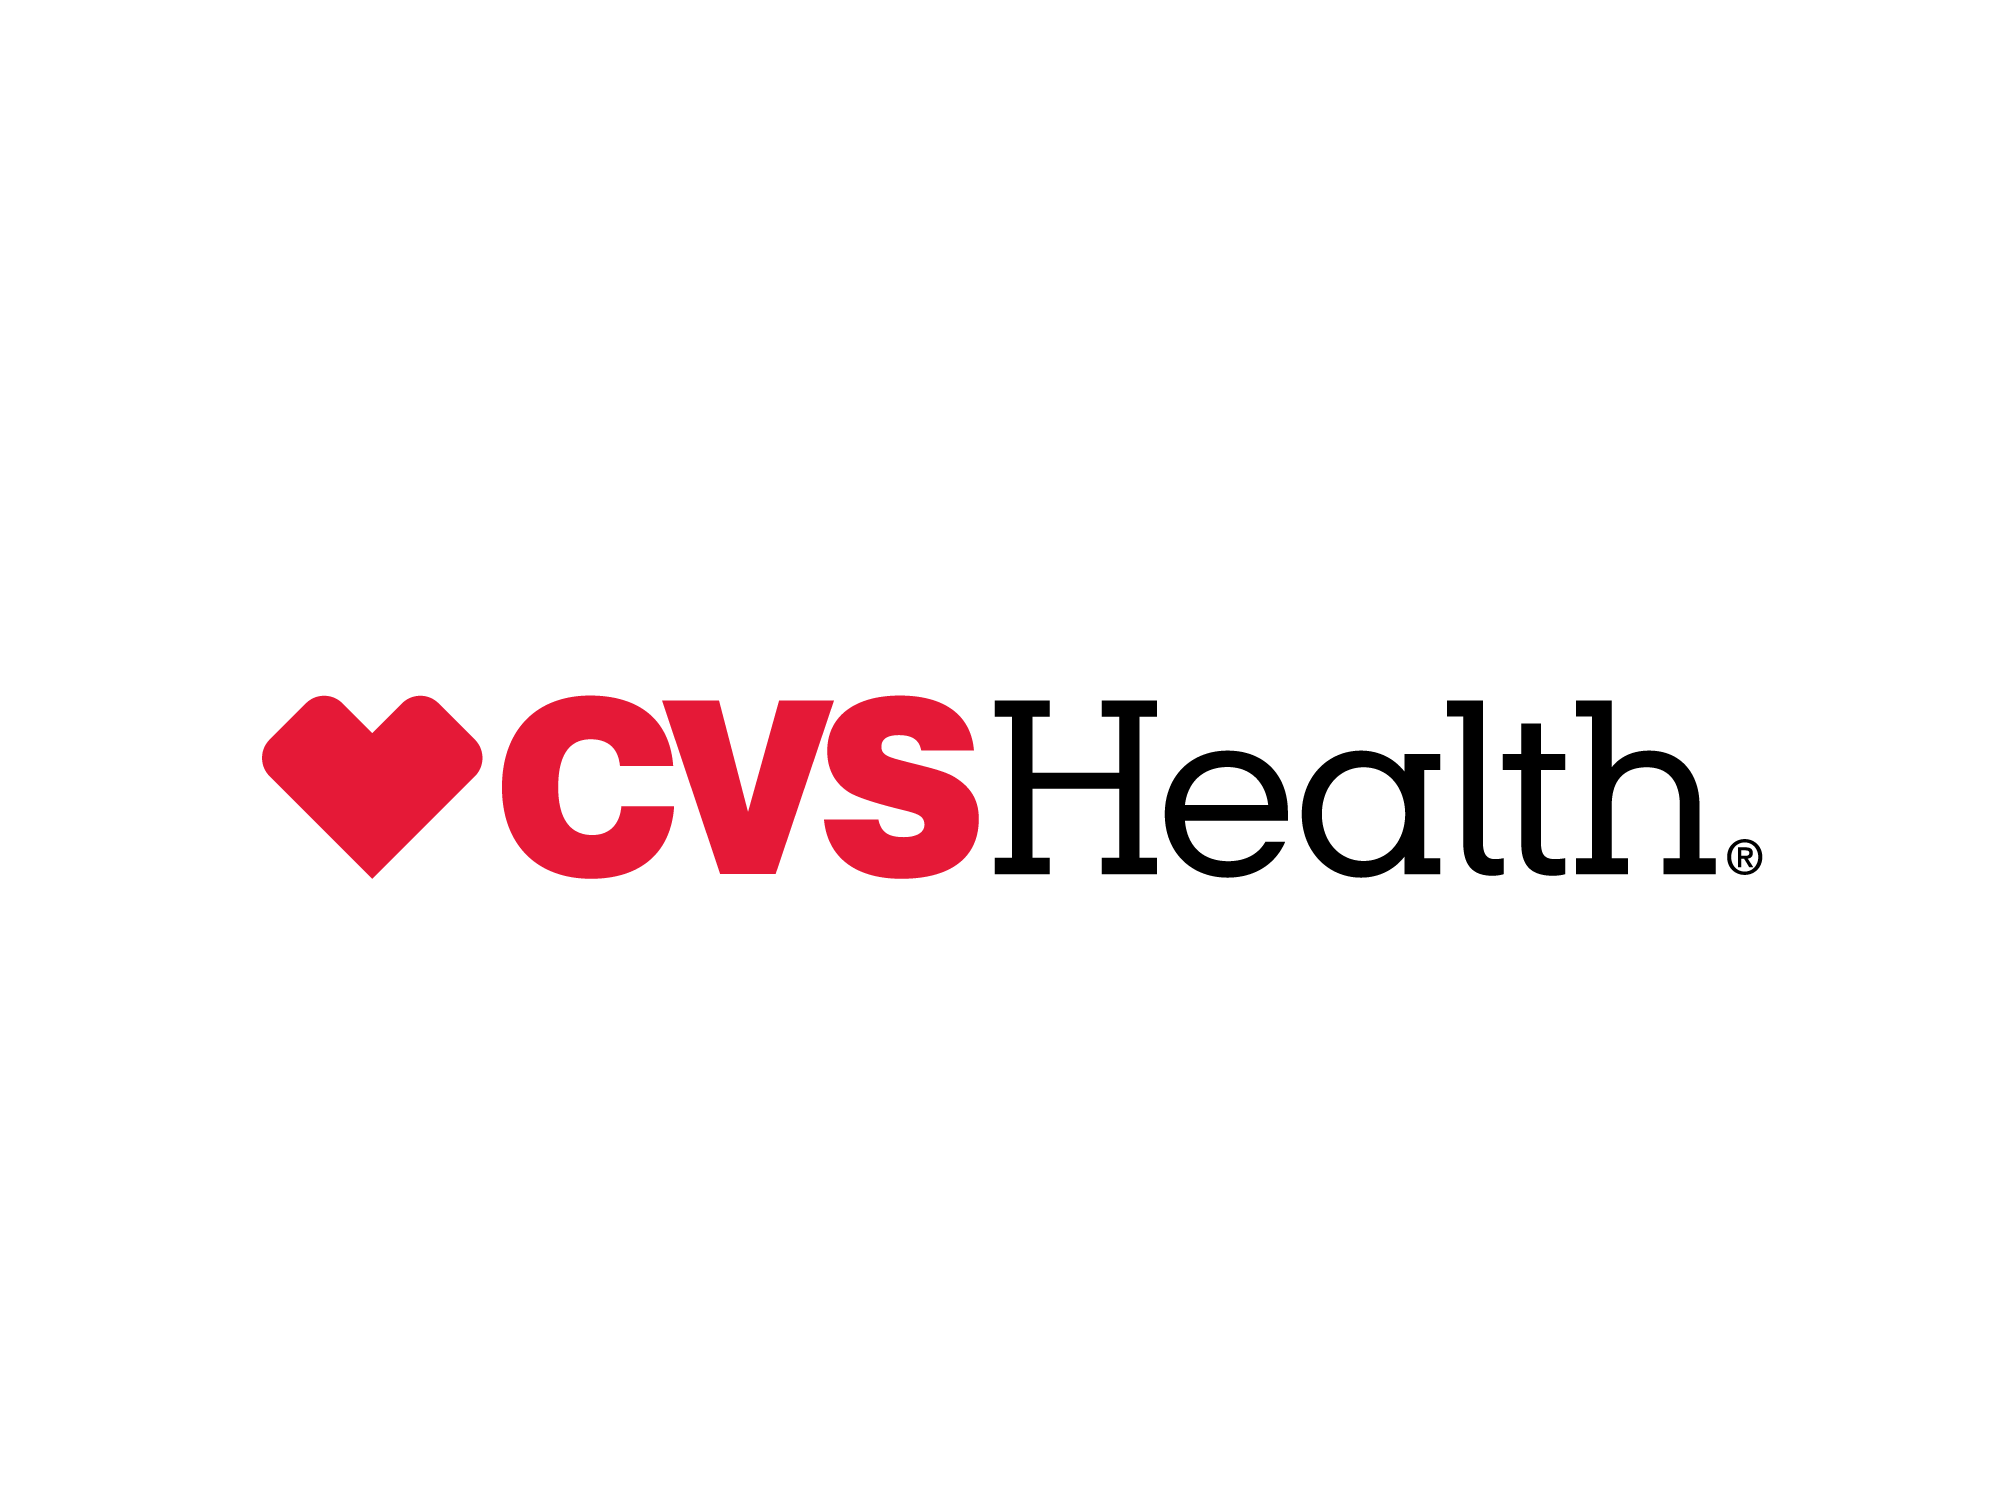 Cvs health scholarship facilities transmit irf pais to the centers for medicare